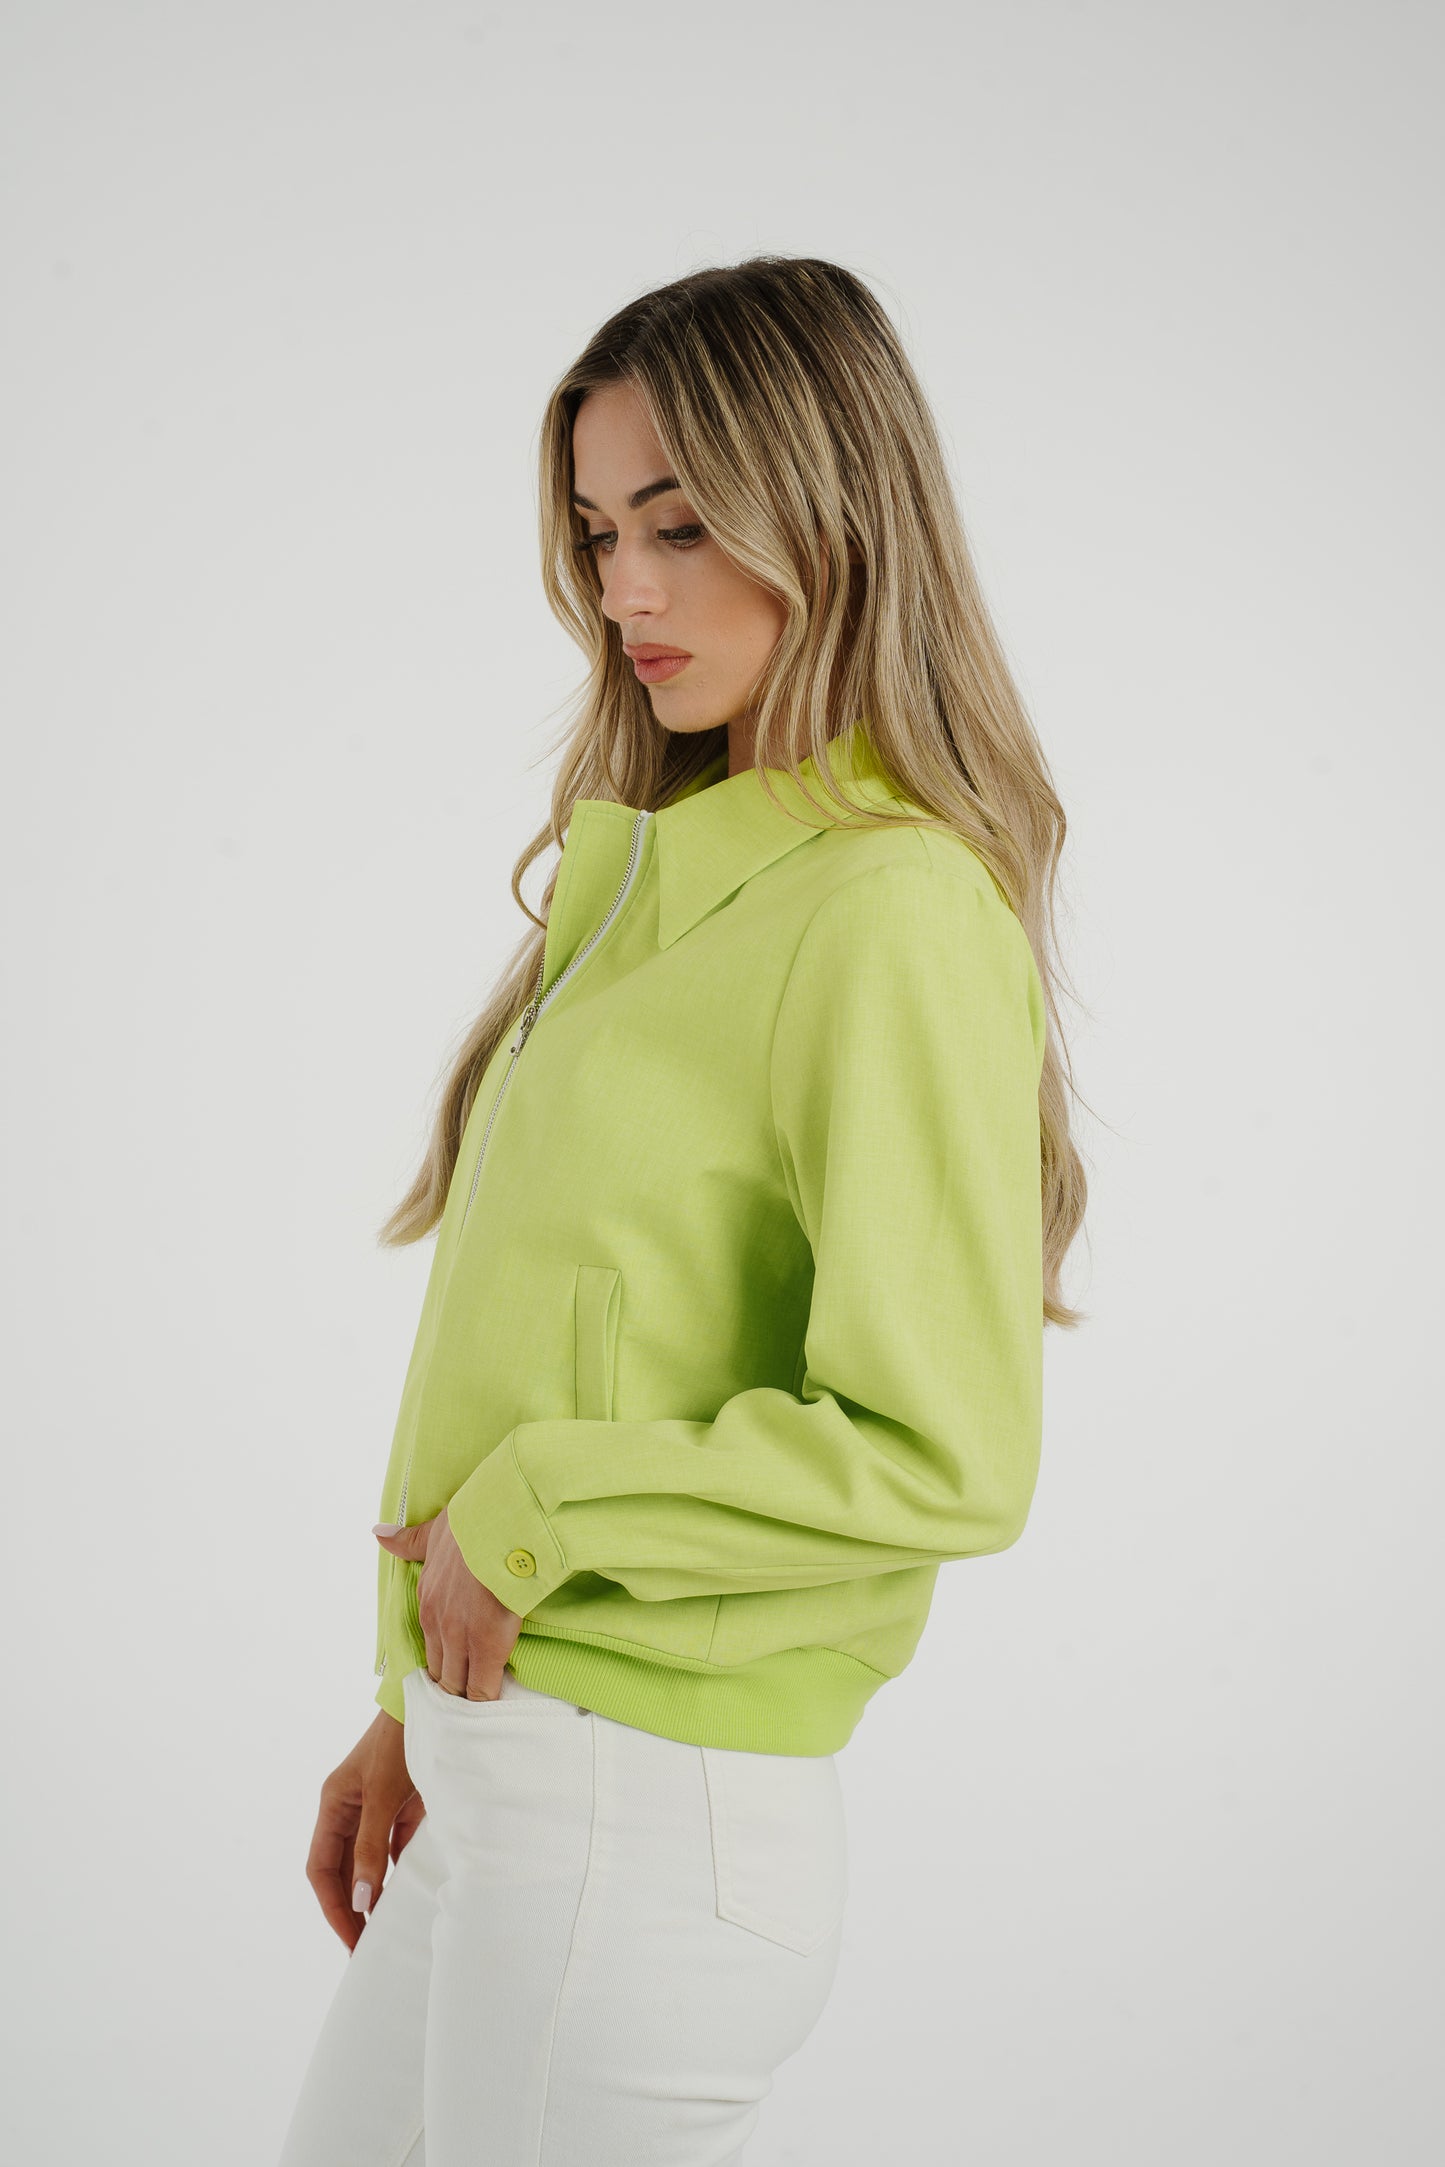 Taylor Jacket In Lime